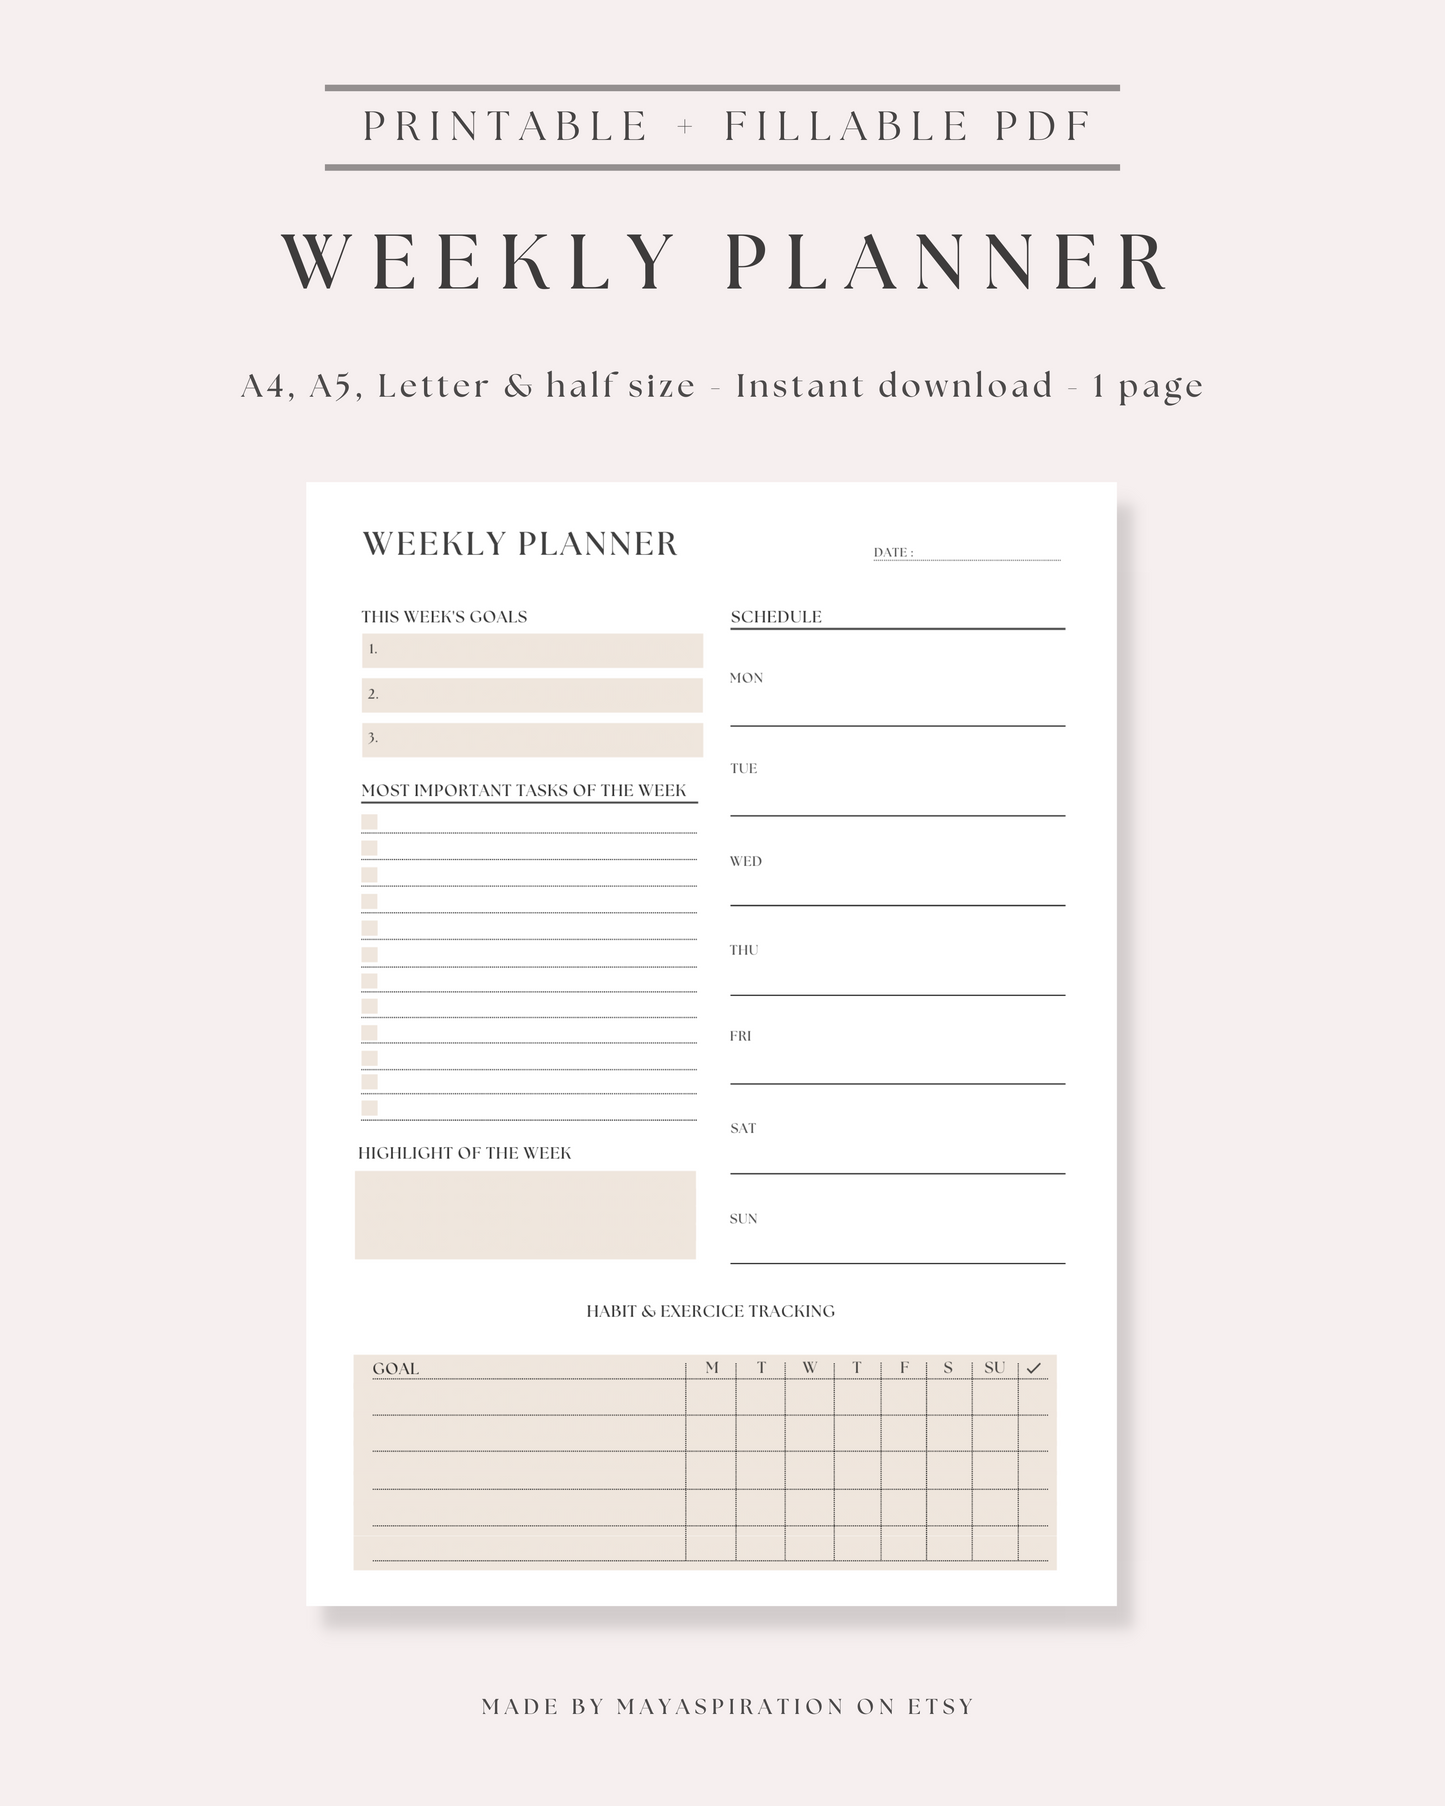 Plan for success - Weekly planner insert